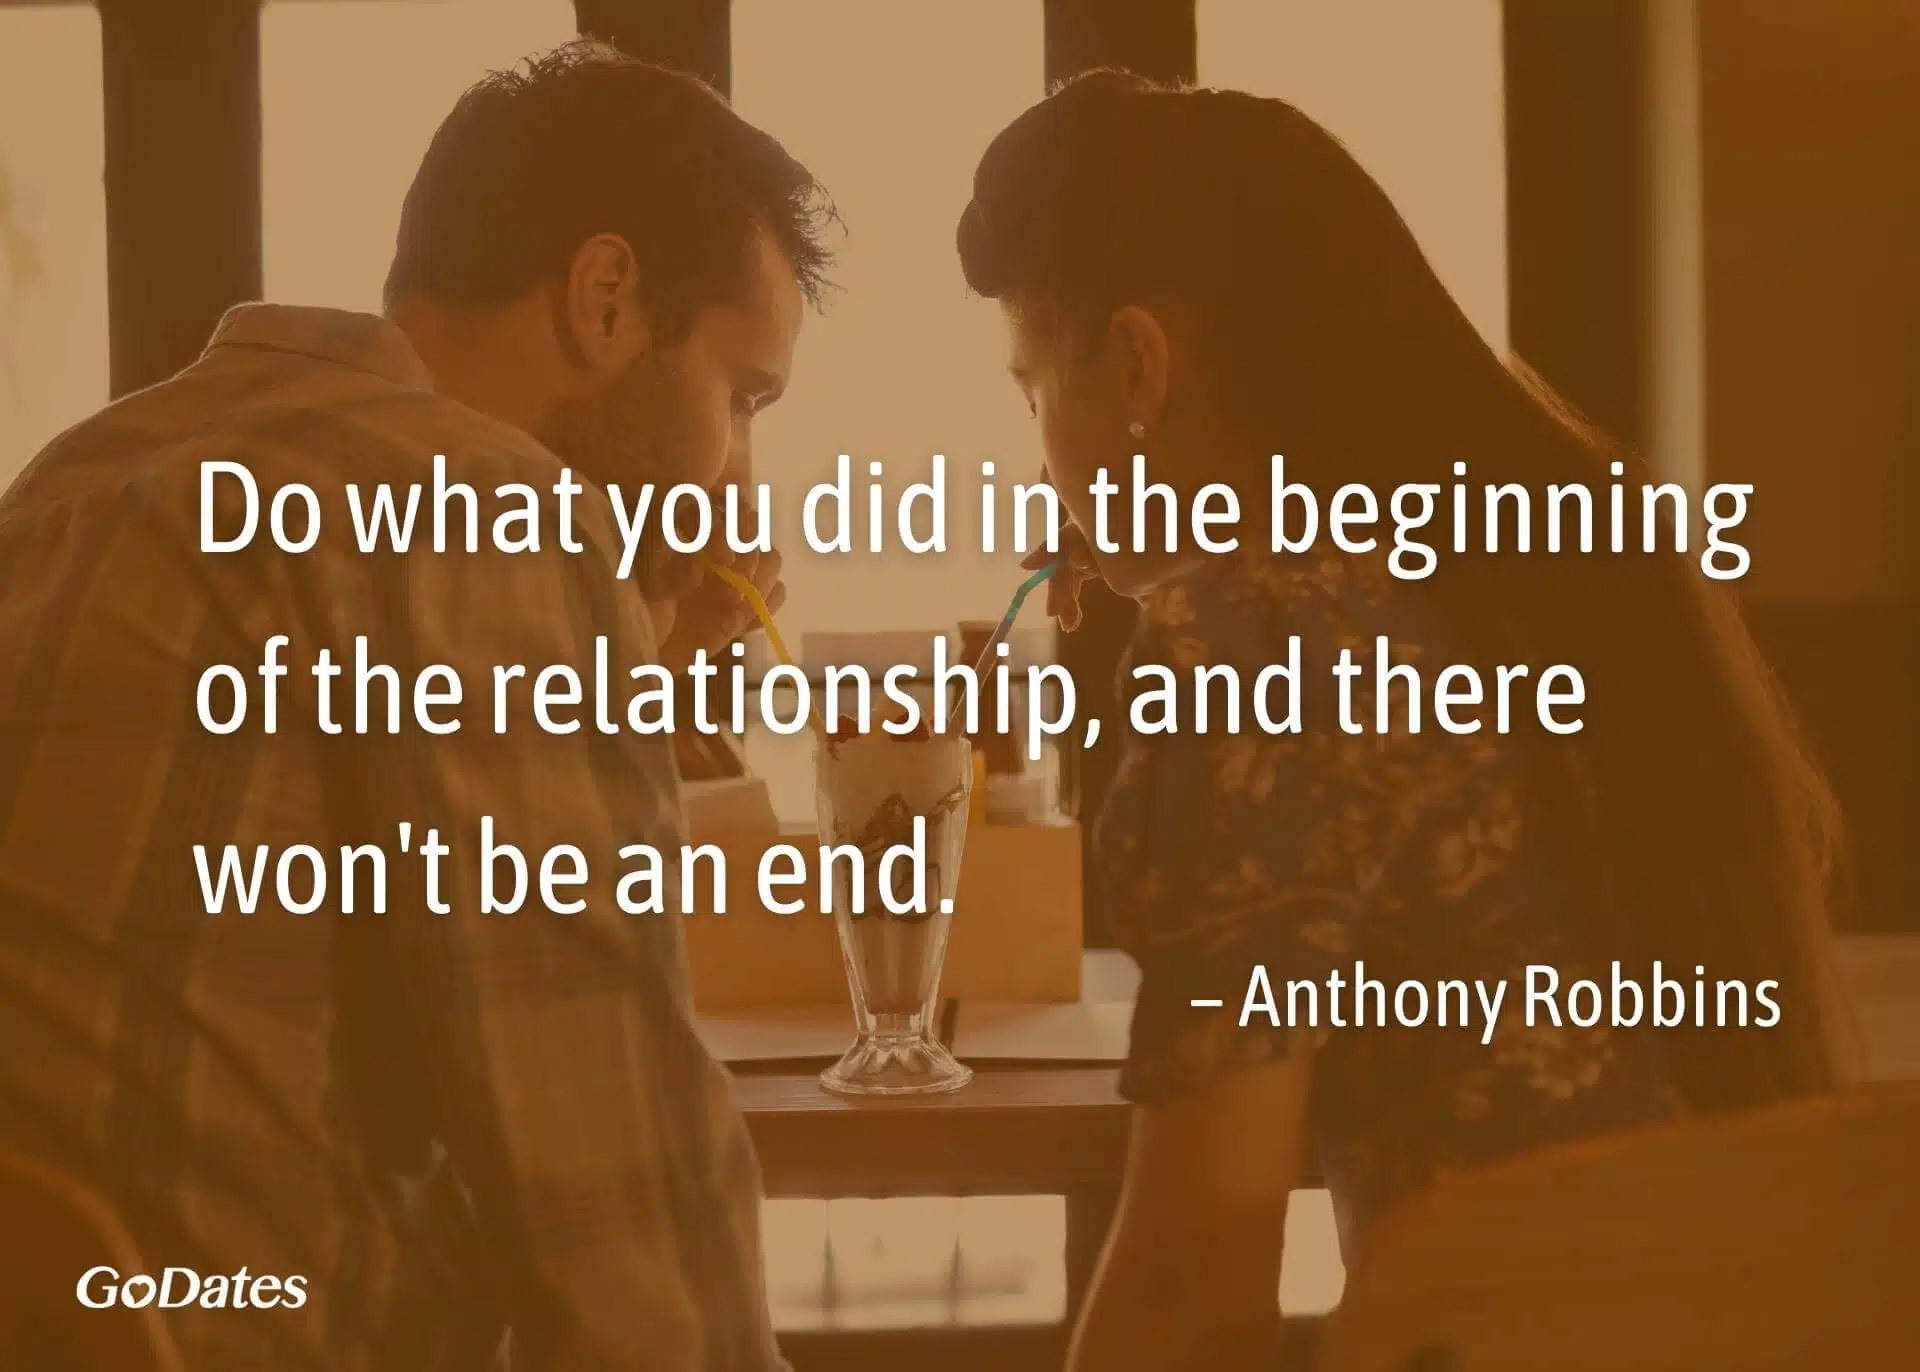 Do what you did in the beginning of the relationship and there wont be an end quote